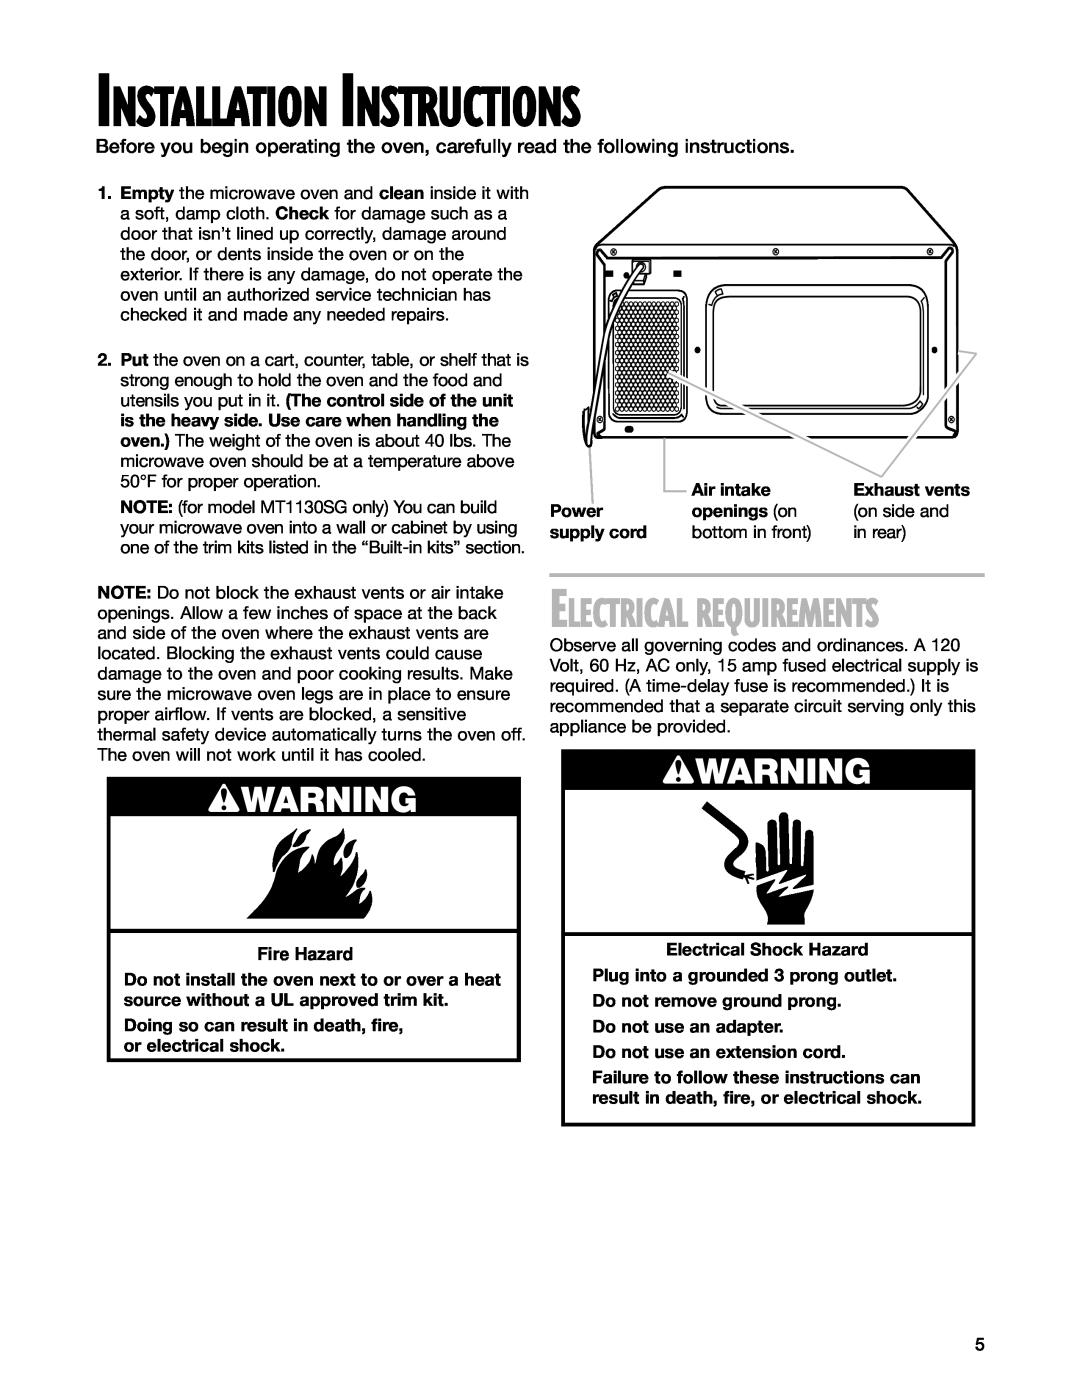 Whirlpool MT1131SG, MT1130SG, MT1151SG installation instructions Electrical Requirements, Installation Instructions, wWARNING 